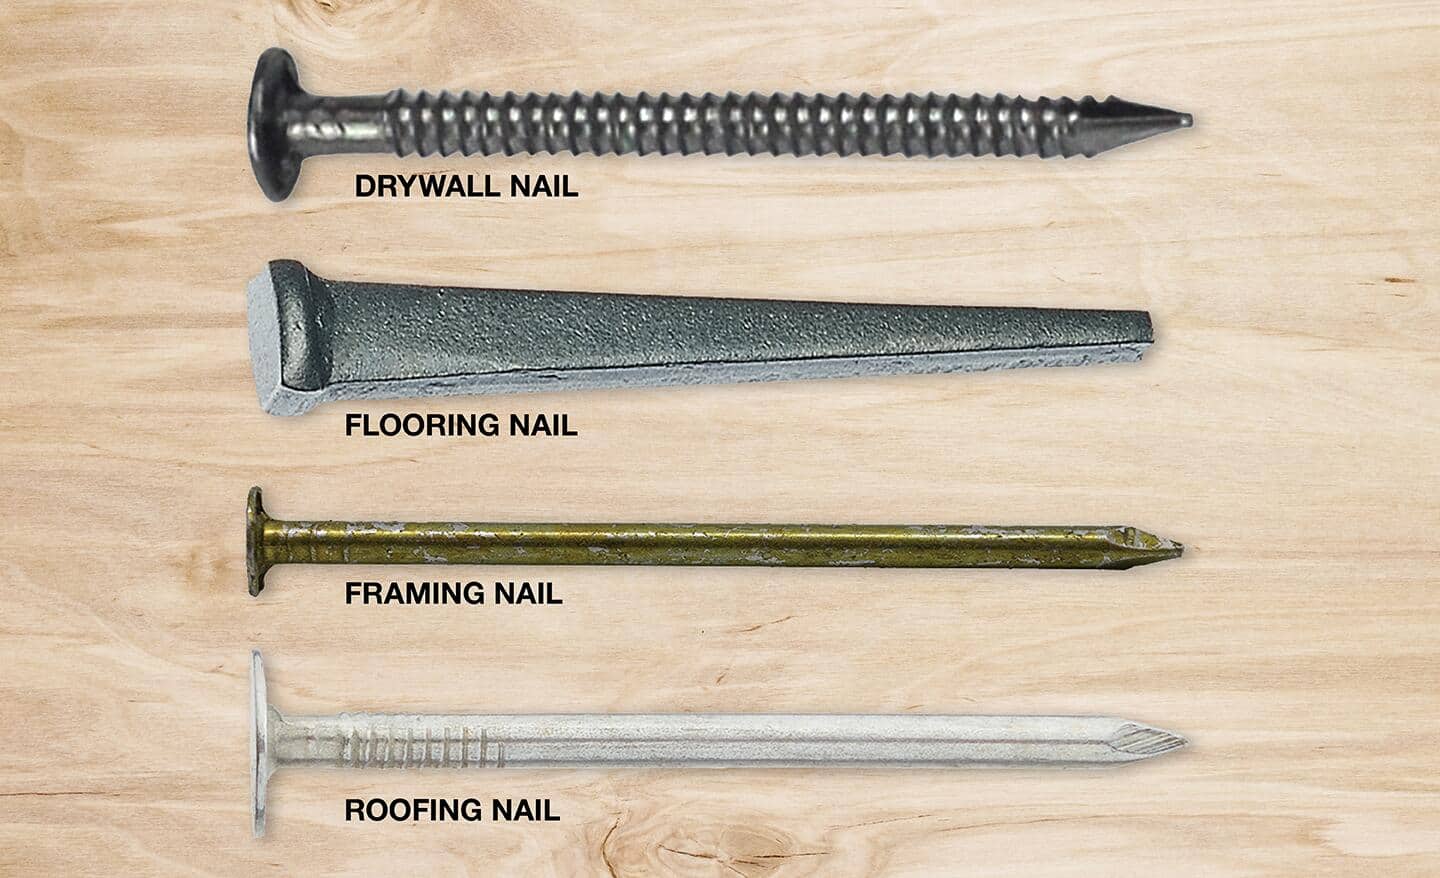 Difference Between Nails and Screws